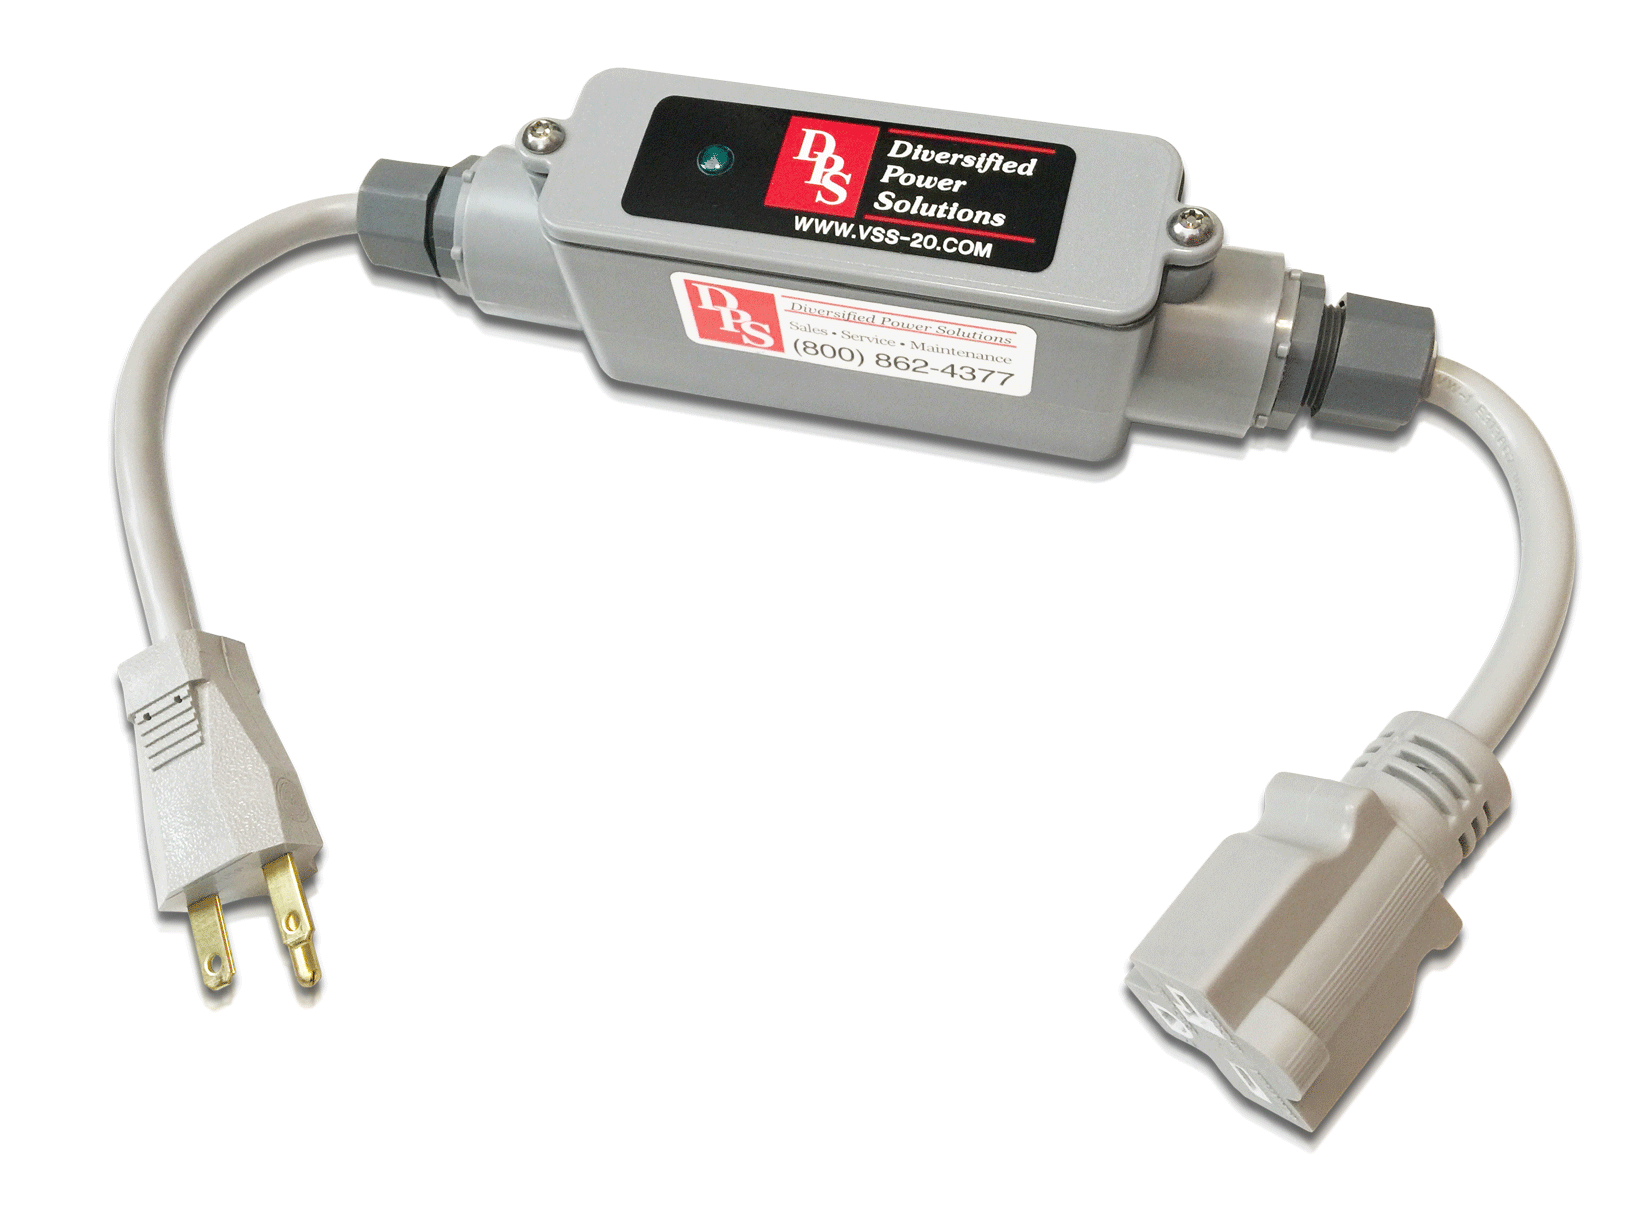 A picture of the connected device with its plug.